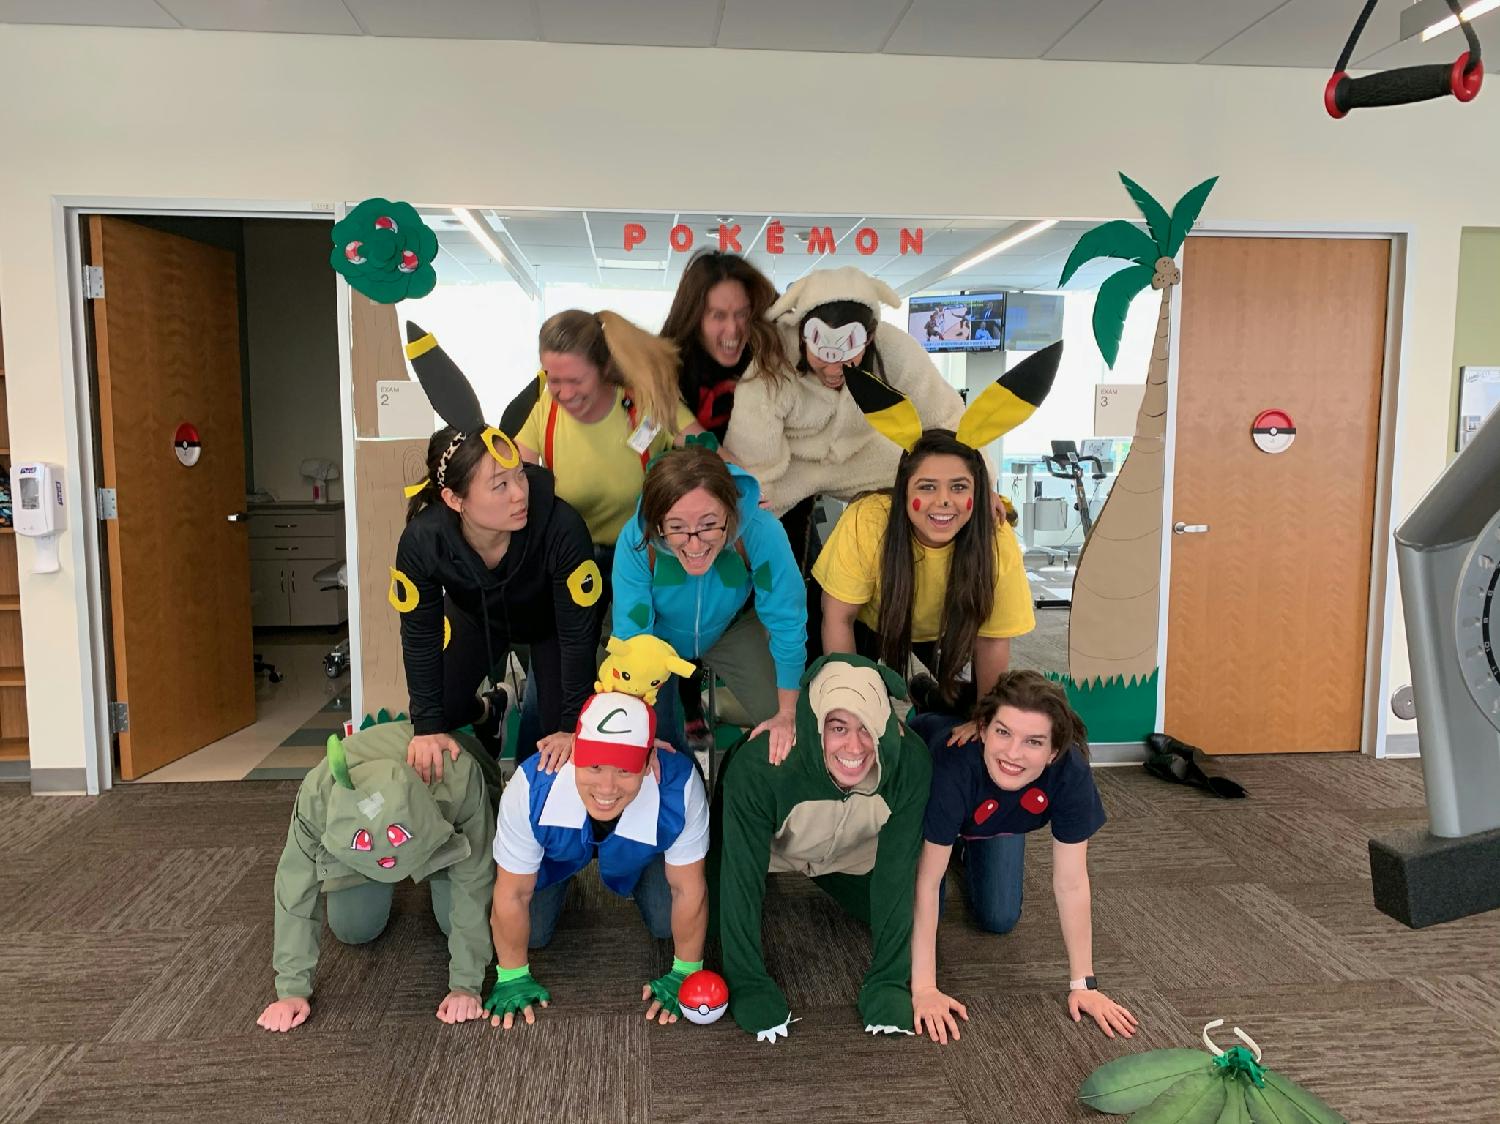 Agile Sunnyvale team decorated the clinic and dressed up as Pokemon for Halloween